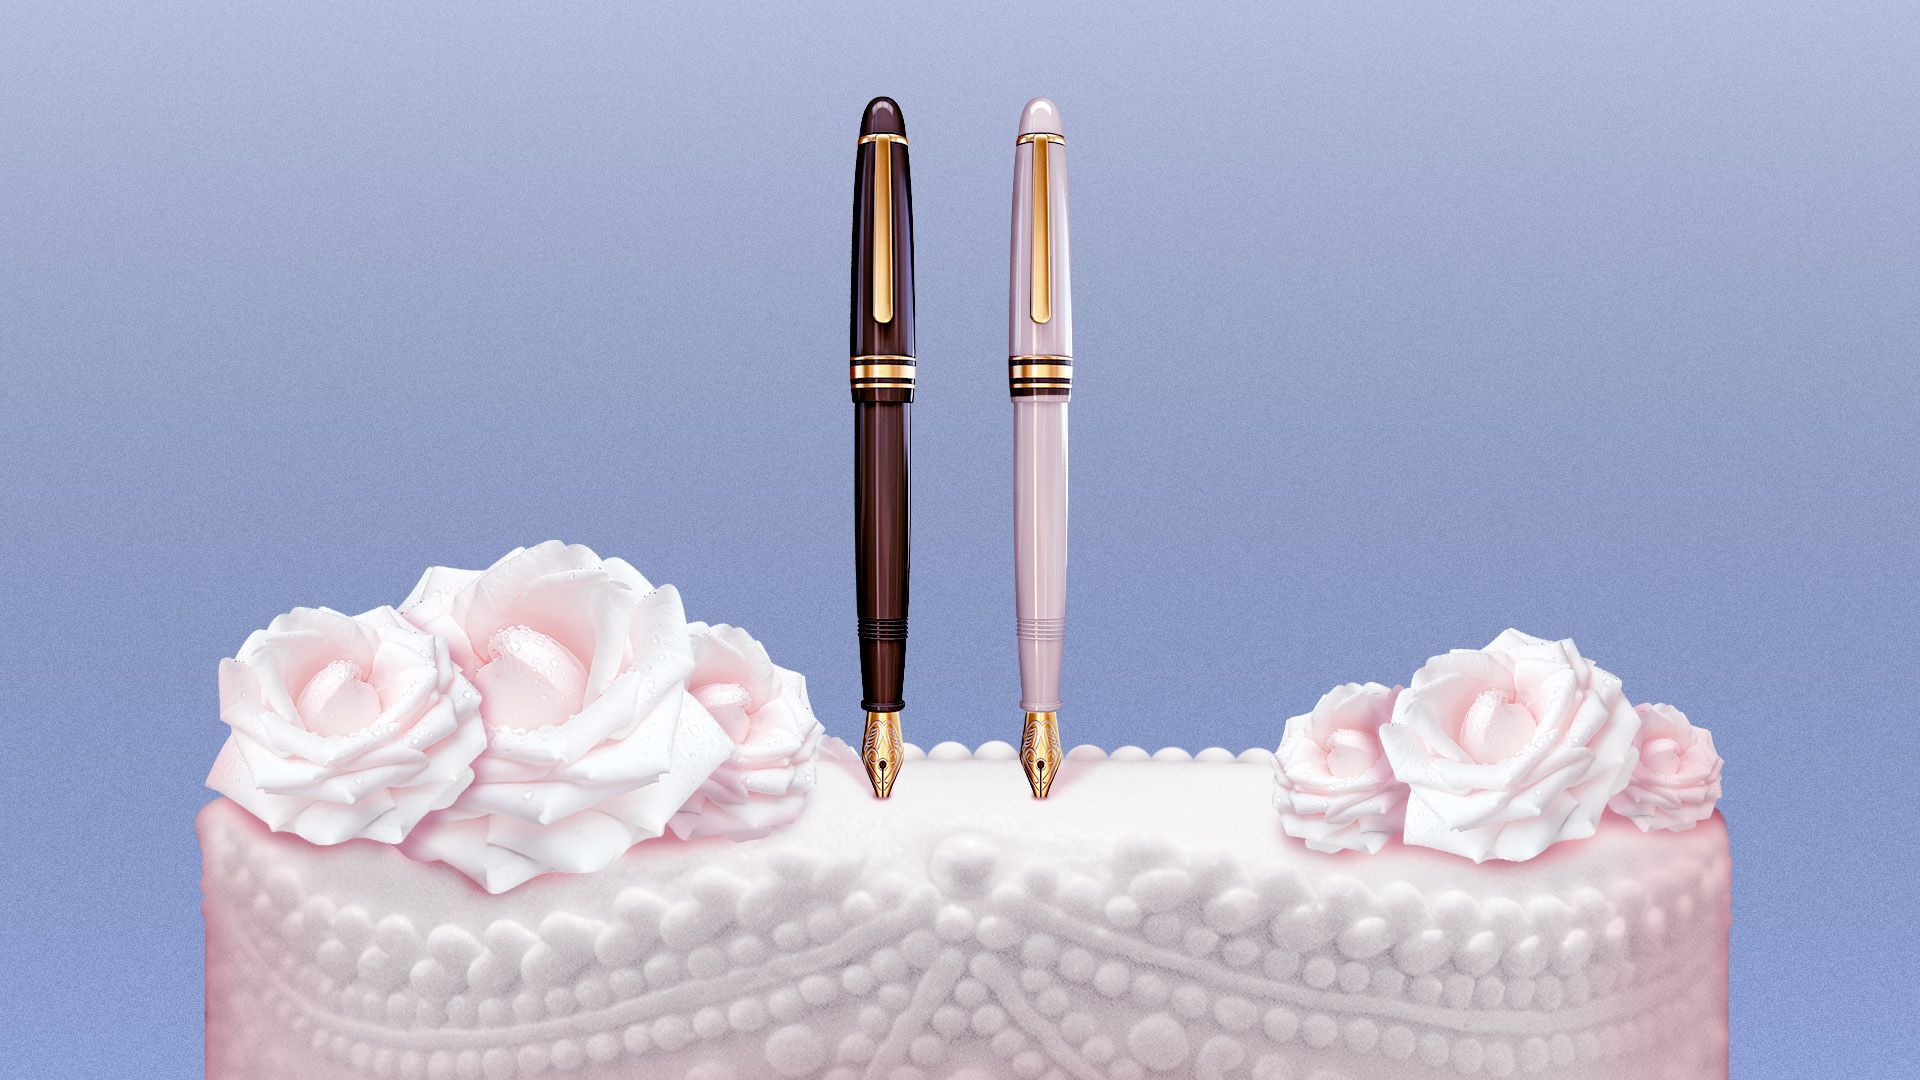 Illustration of two fountain pens on top of a wedding cake